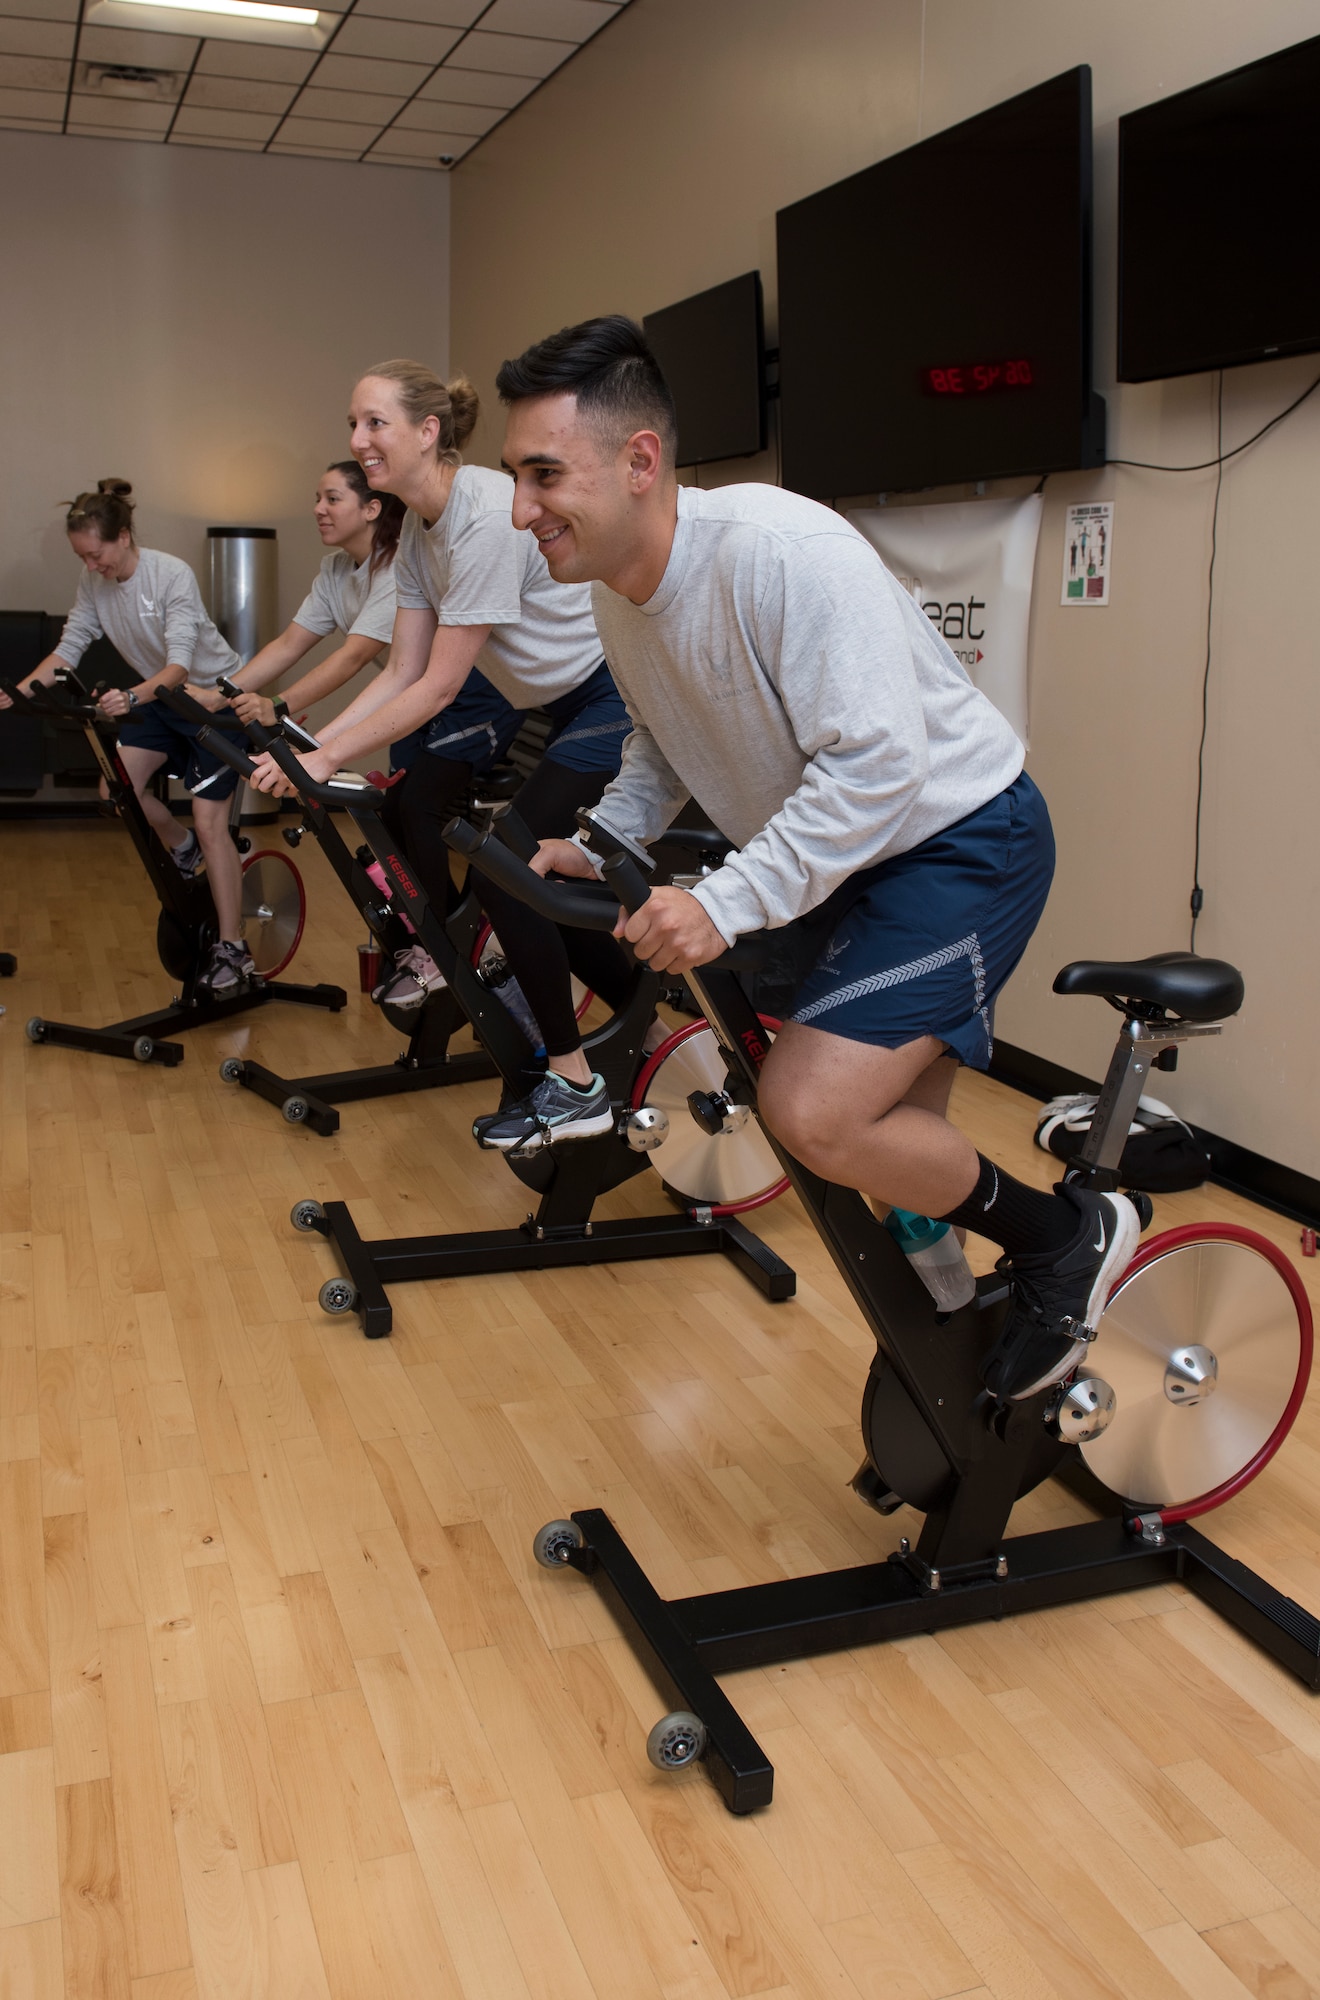 Airmen assigned to Whiteman Air Force Base, Missouri, participate in a cycling class at the Whiteman AFB fitness center on October 10, 2019. The class served as part of the Health and Readiness Optimization (HeRO) strategy, an initiative newly adopted by the Air Force to address targets for health improvements in areas such as physical activity, nutrition, sleep and nicotine cessation. (U.S. Air Force photo by Staff Sgt. Kayla White)